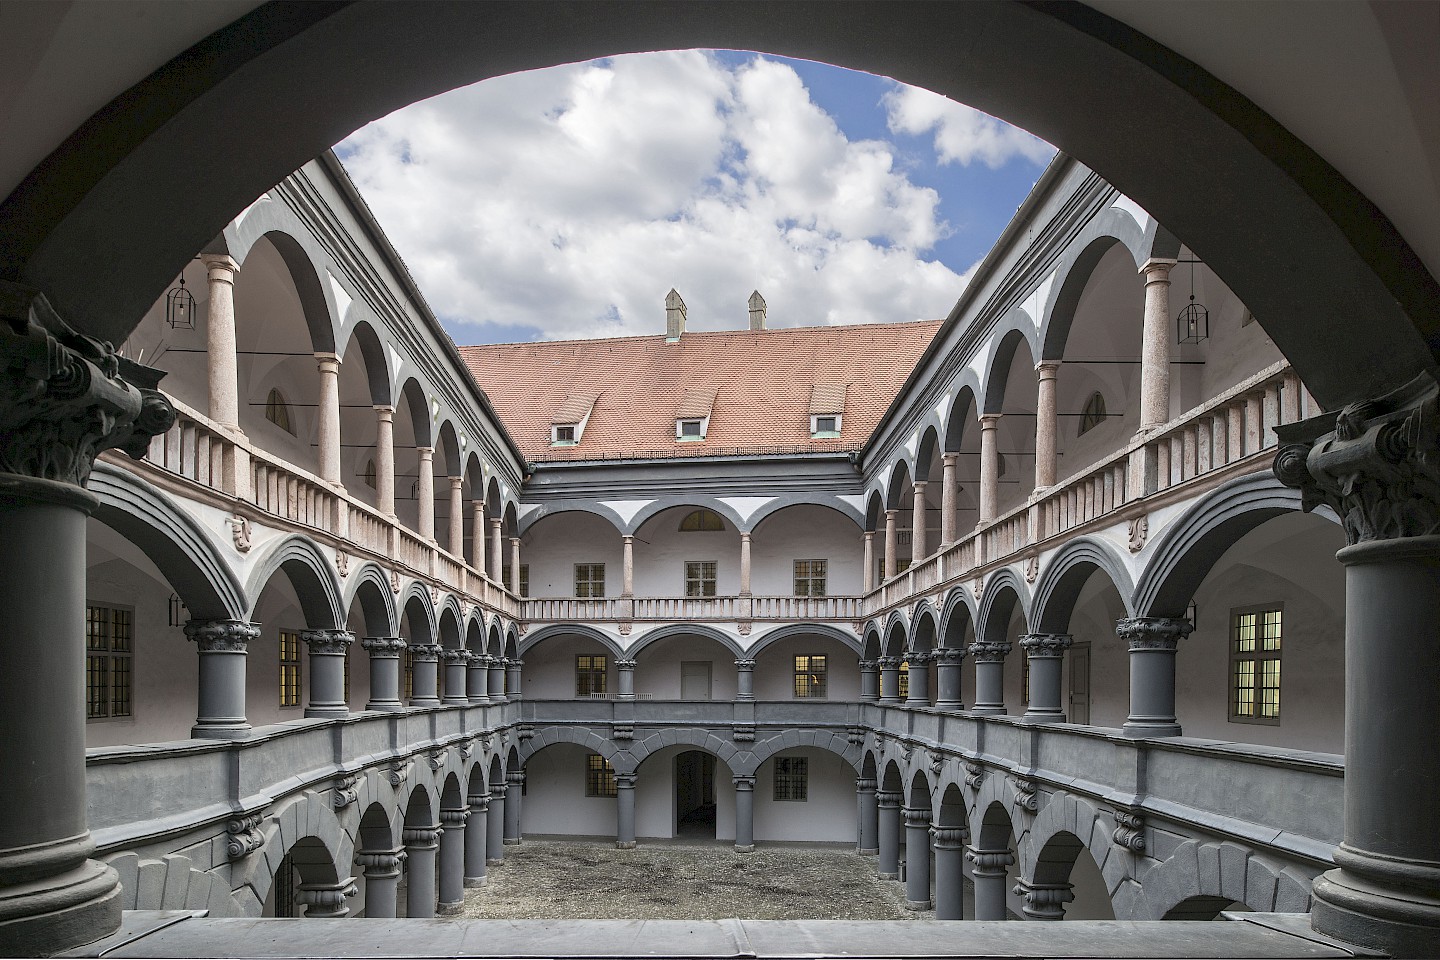 Courtyard of the Old Mint, the headquarters of the Bavarian State Office for the Preservation of Historical Monuments